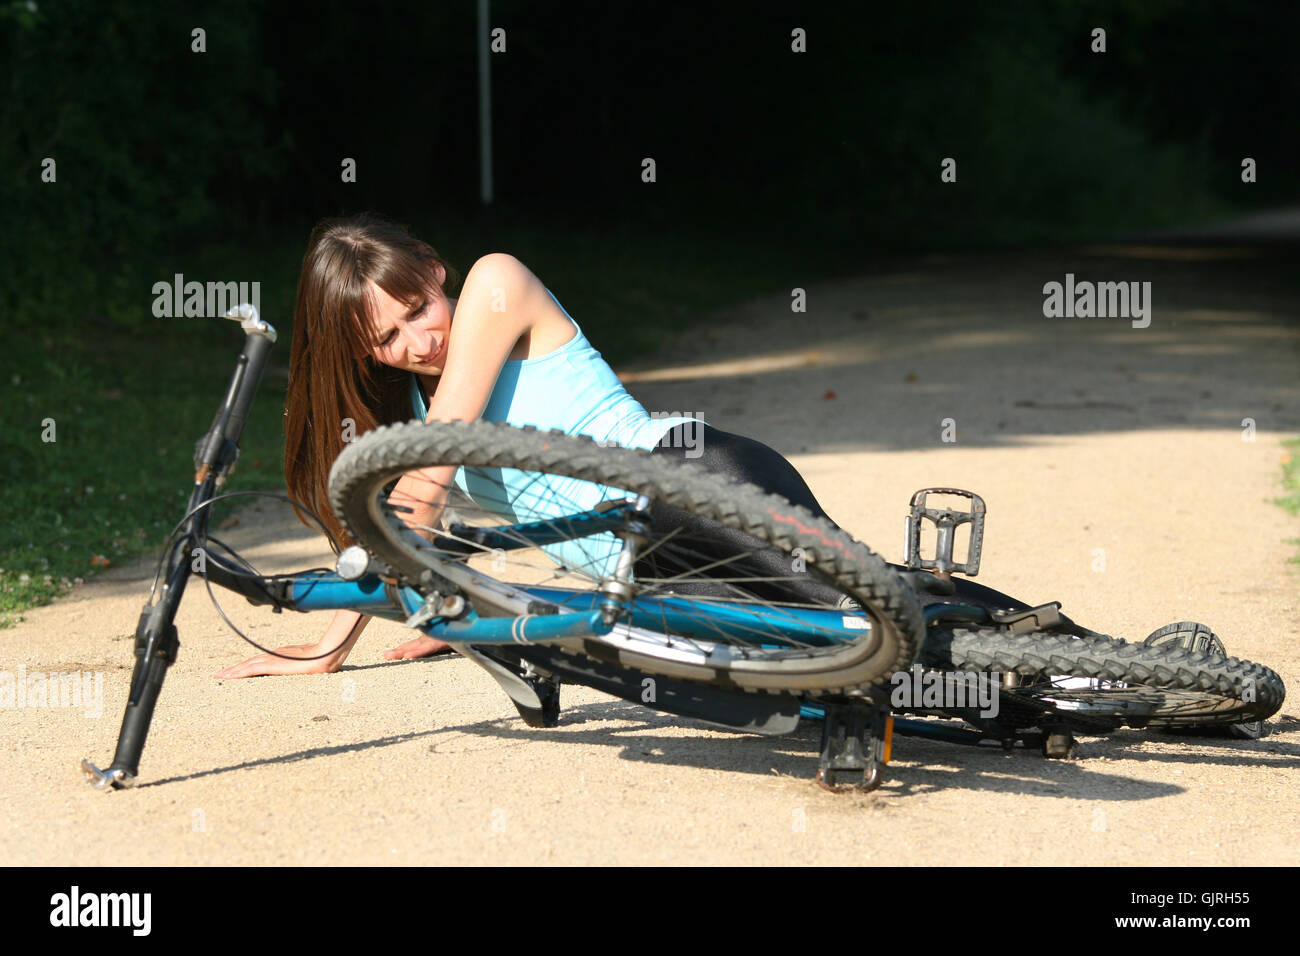 woman pain accident Stock Photo